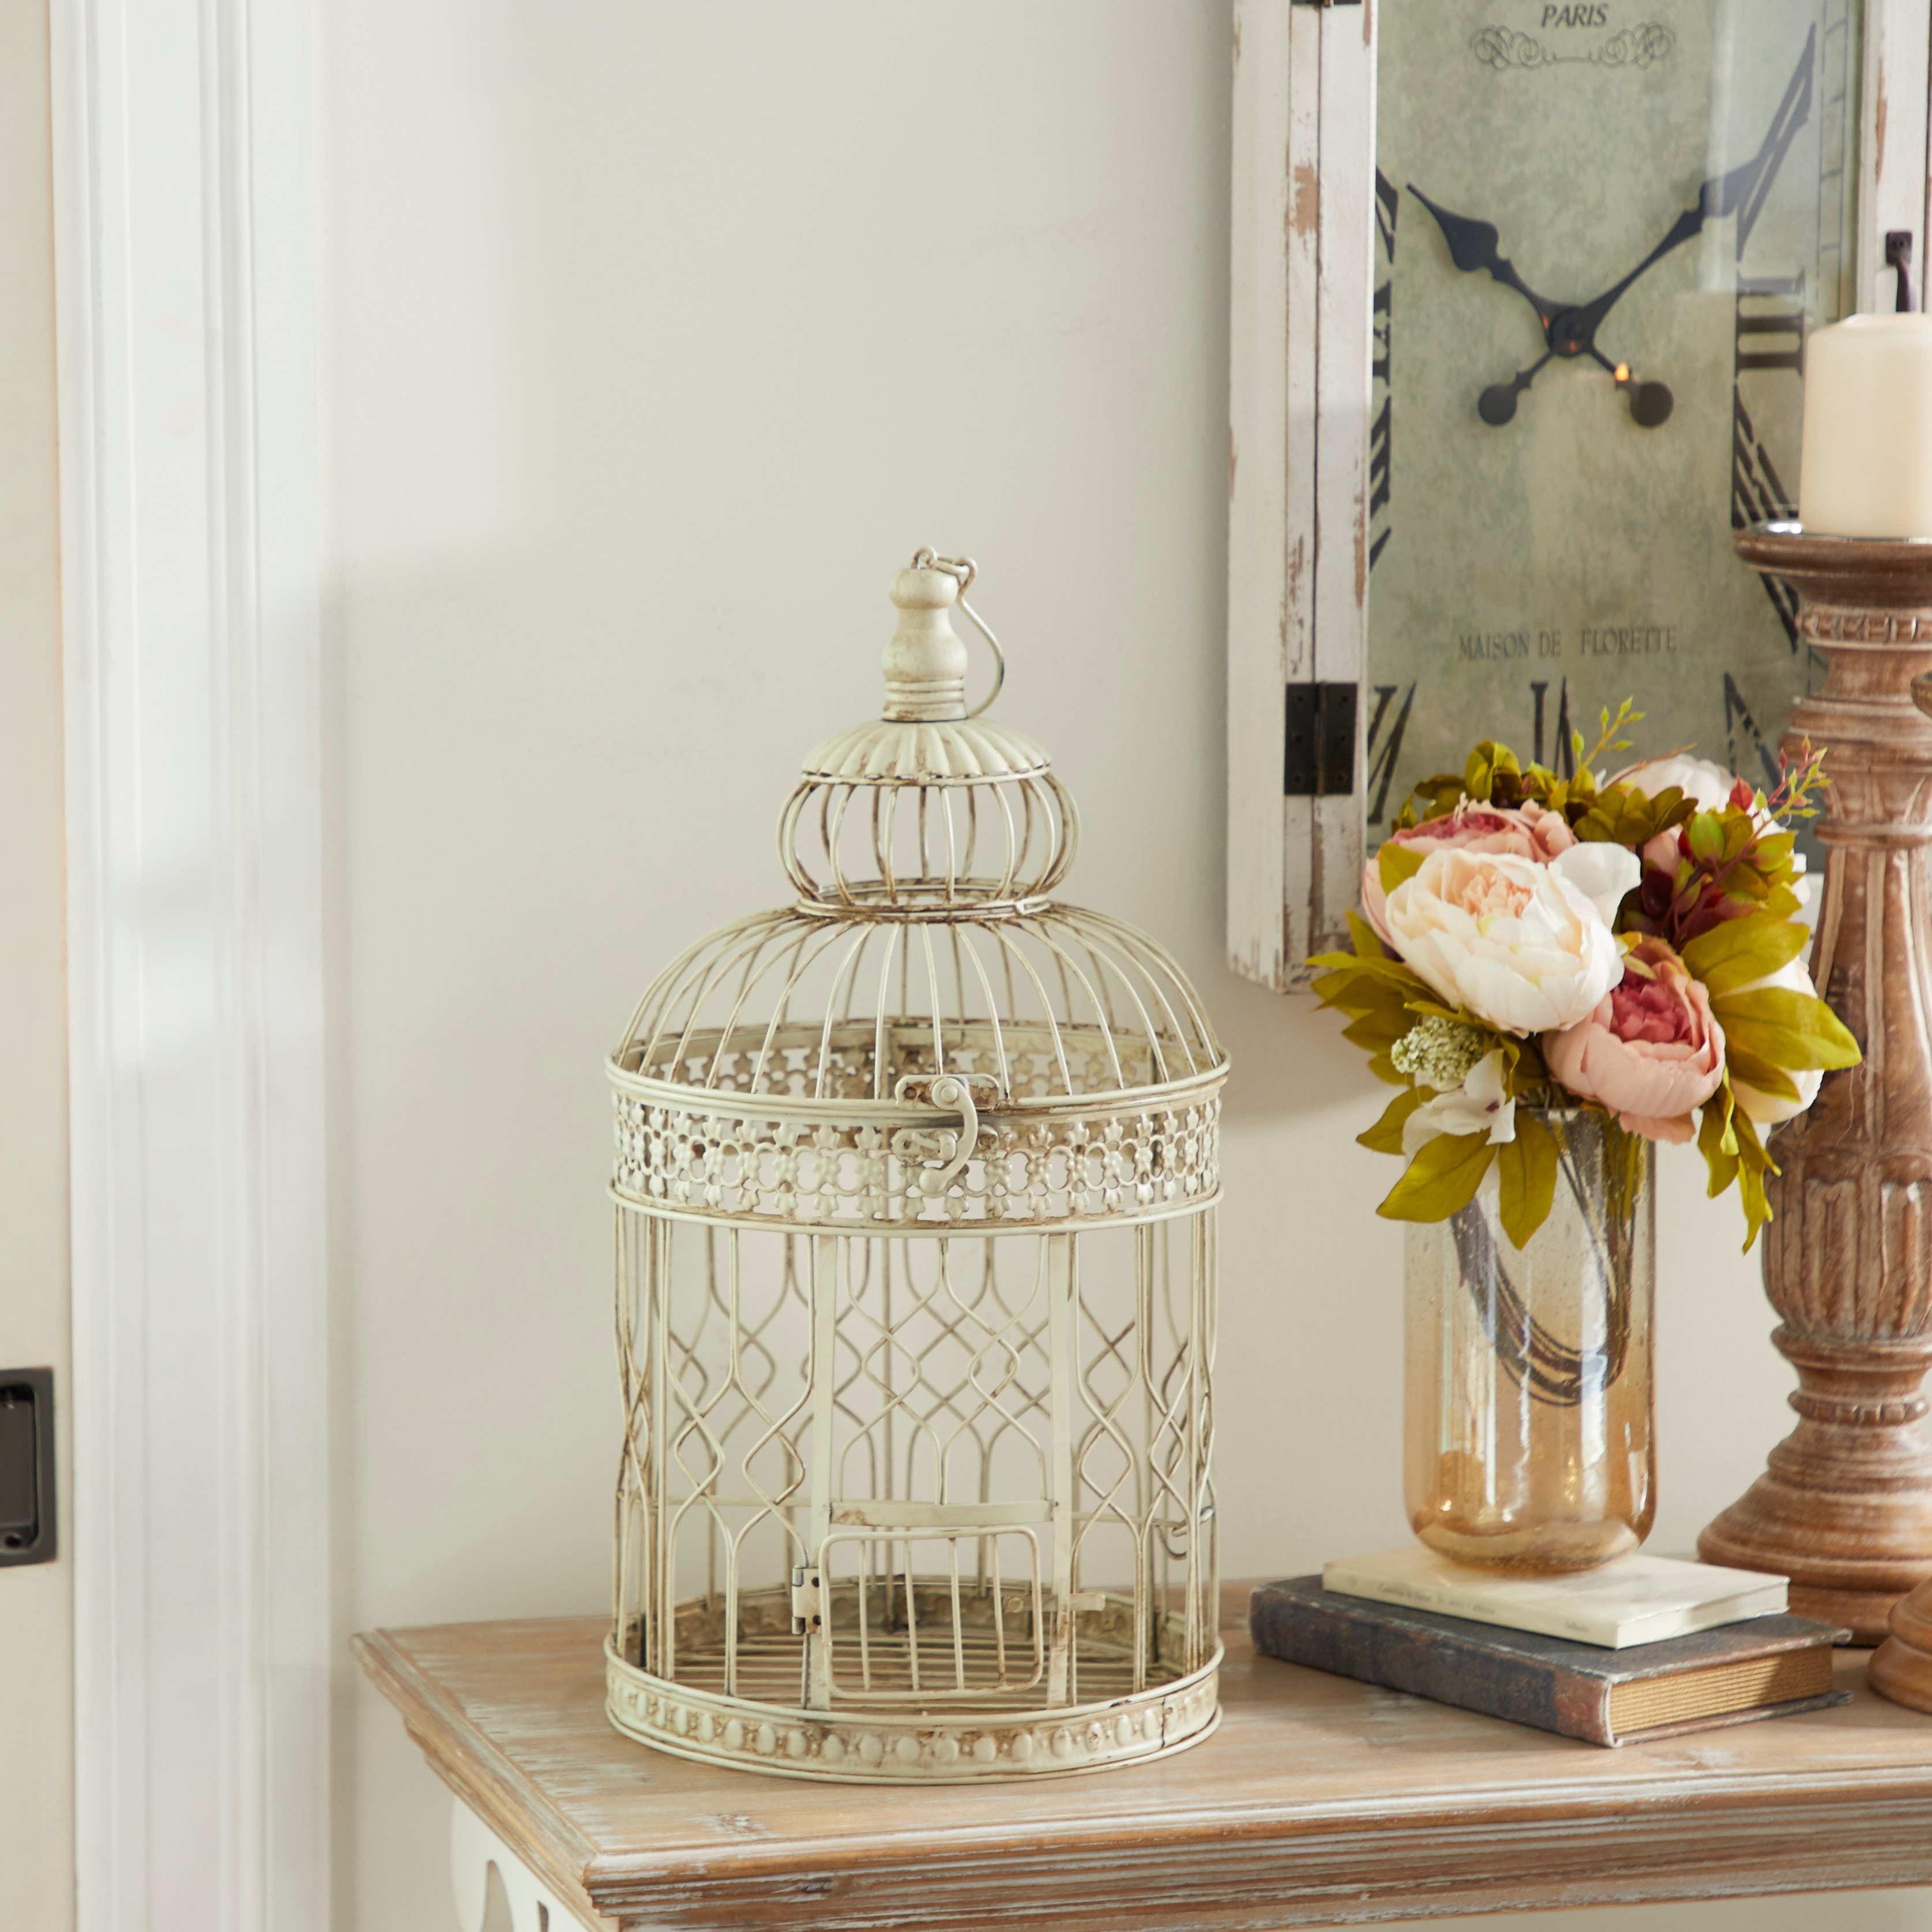 Decorative Bird Cages, On Sale Decorative Objects - Bed Bath & Beyond